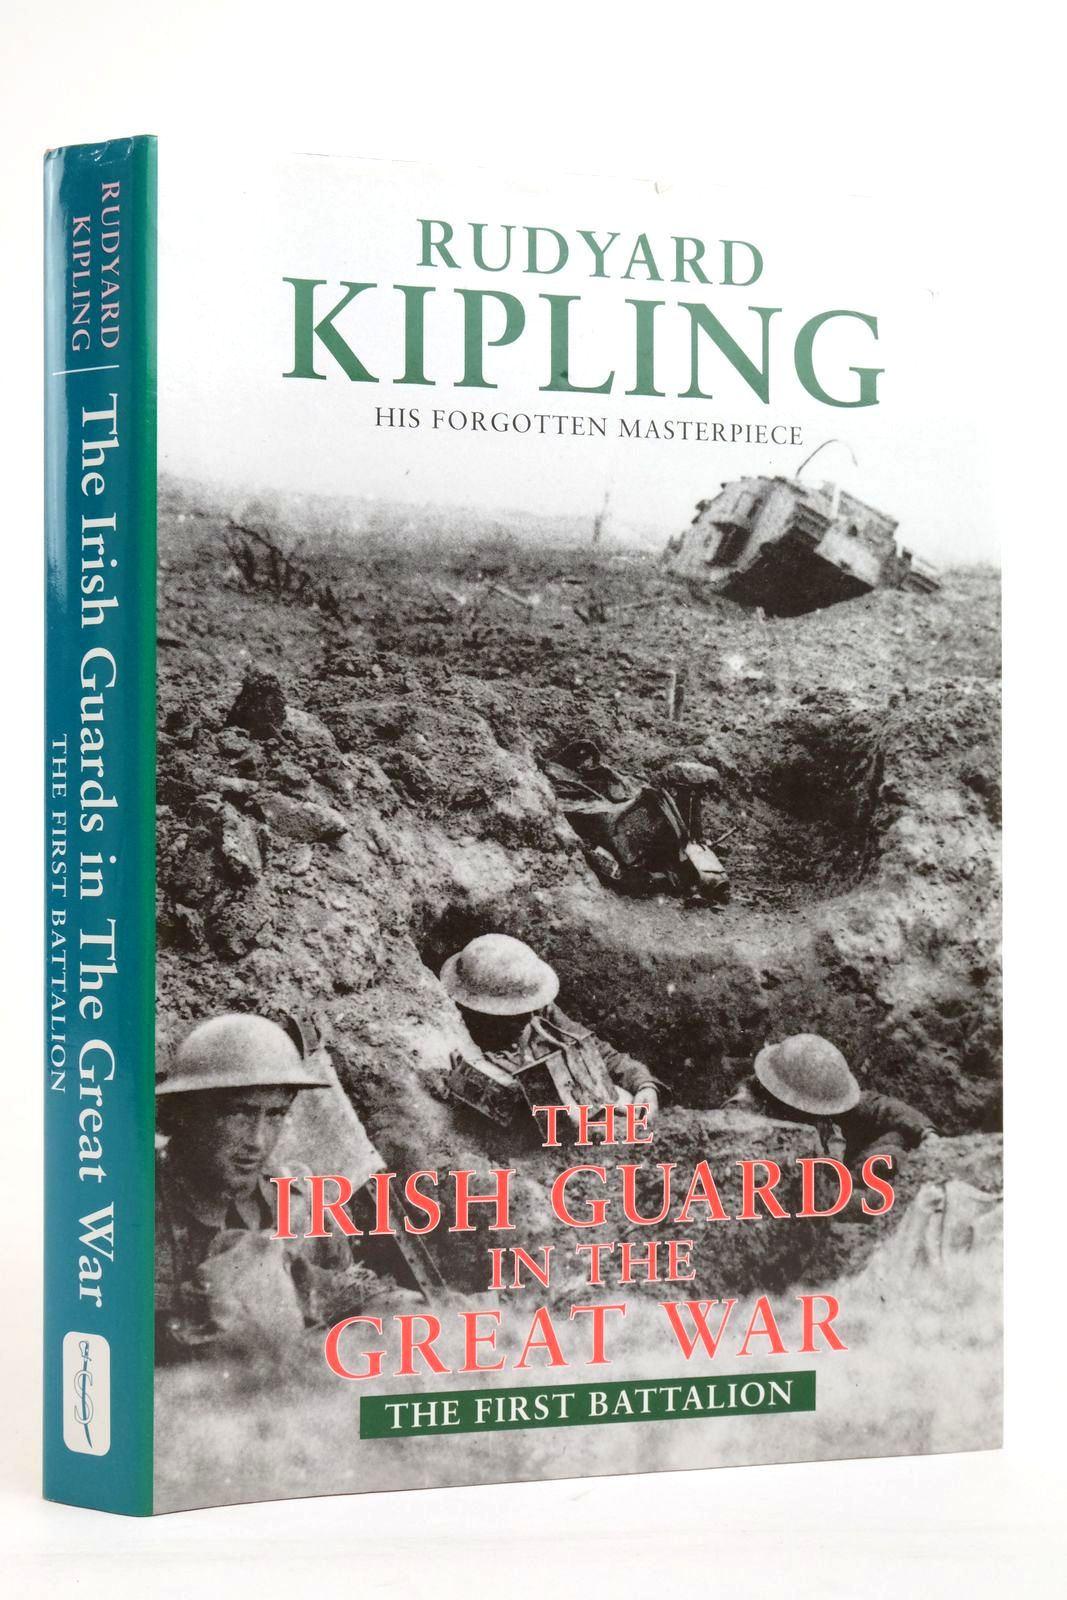 Photo of THE IRISH GUARDS IN THE GREAT WAR: THE FIRST BATTALION written by Kipling, Rudyard published by Spellmount Ltd. (STOCK CODE: 2136315)  for sale by Stella & Rose's Books